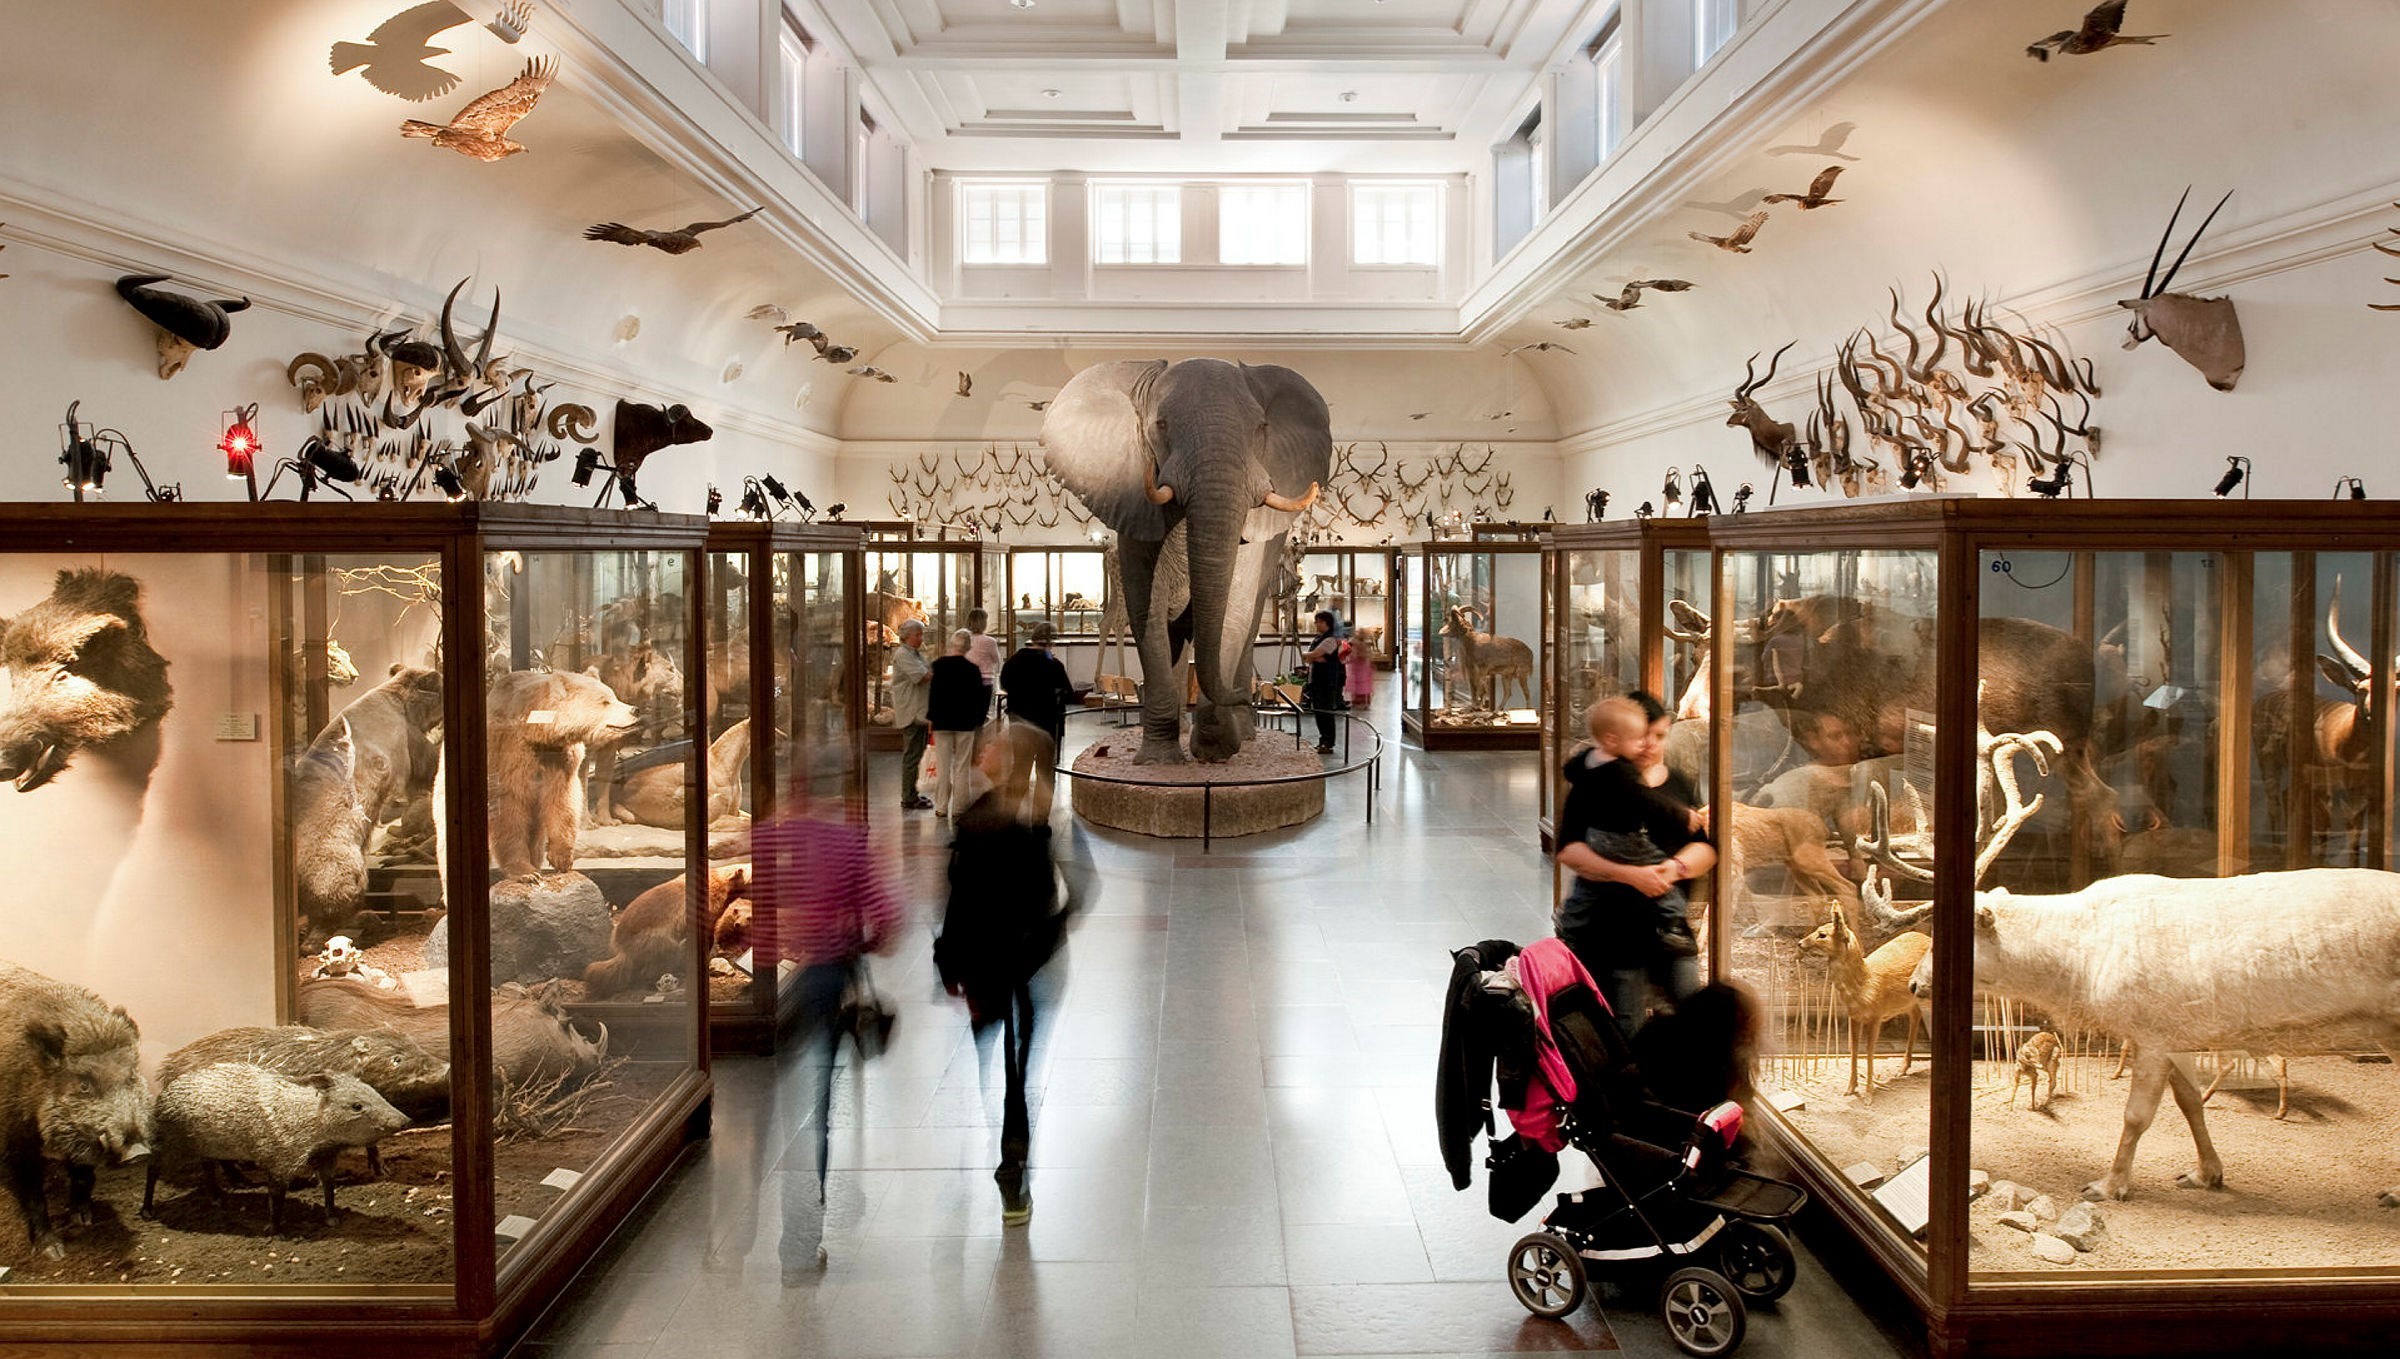 Exhibition hall at the Gothenburg Natural History Museum